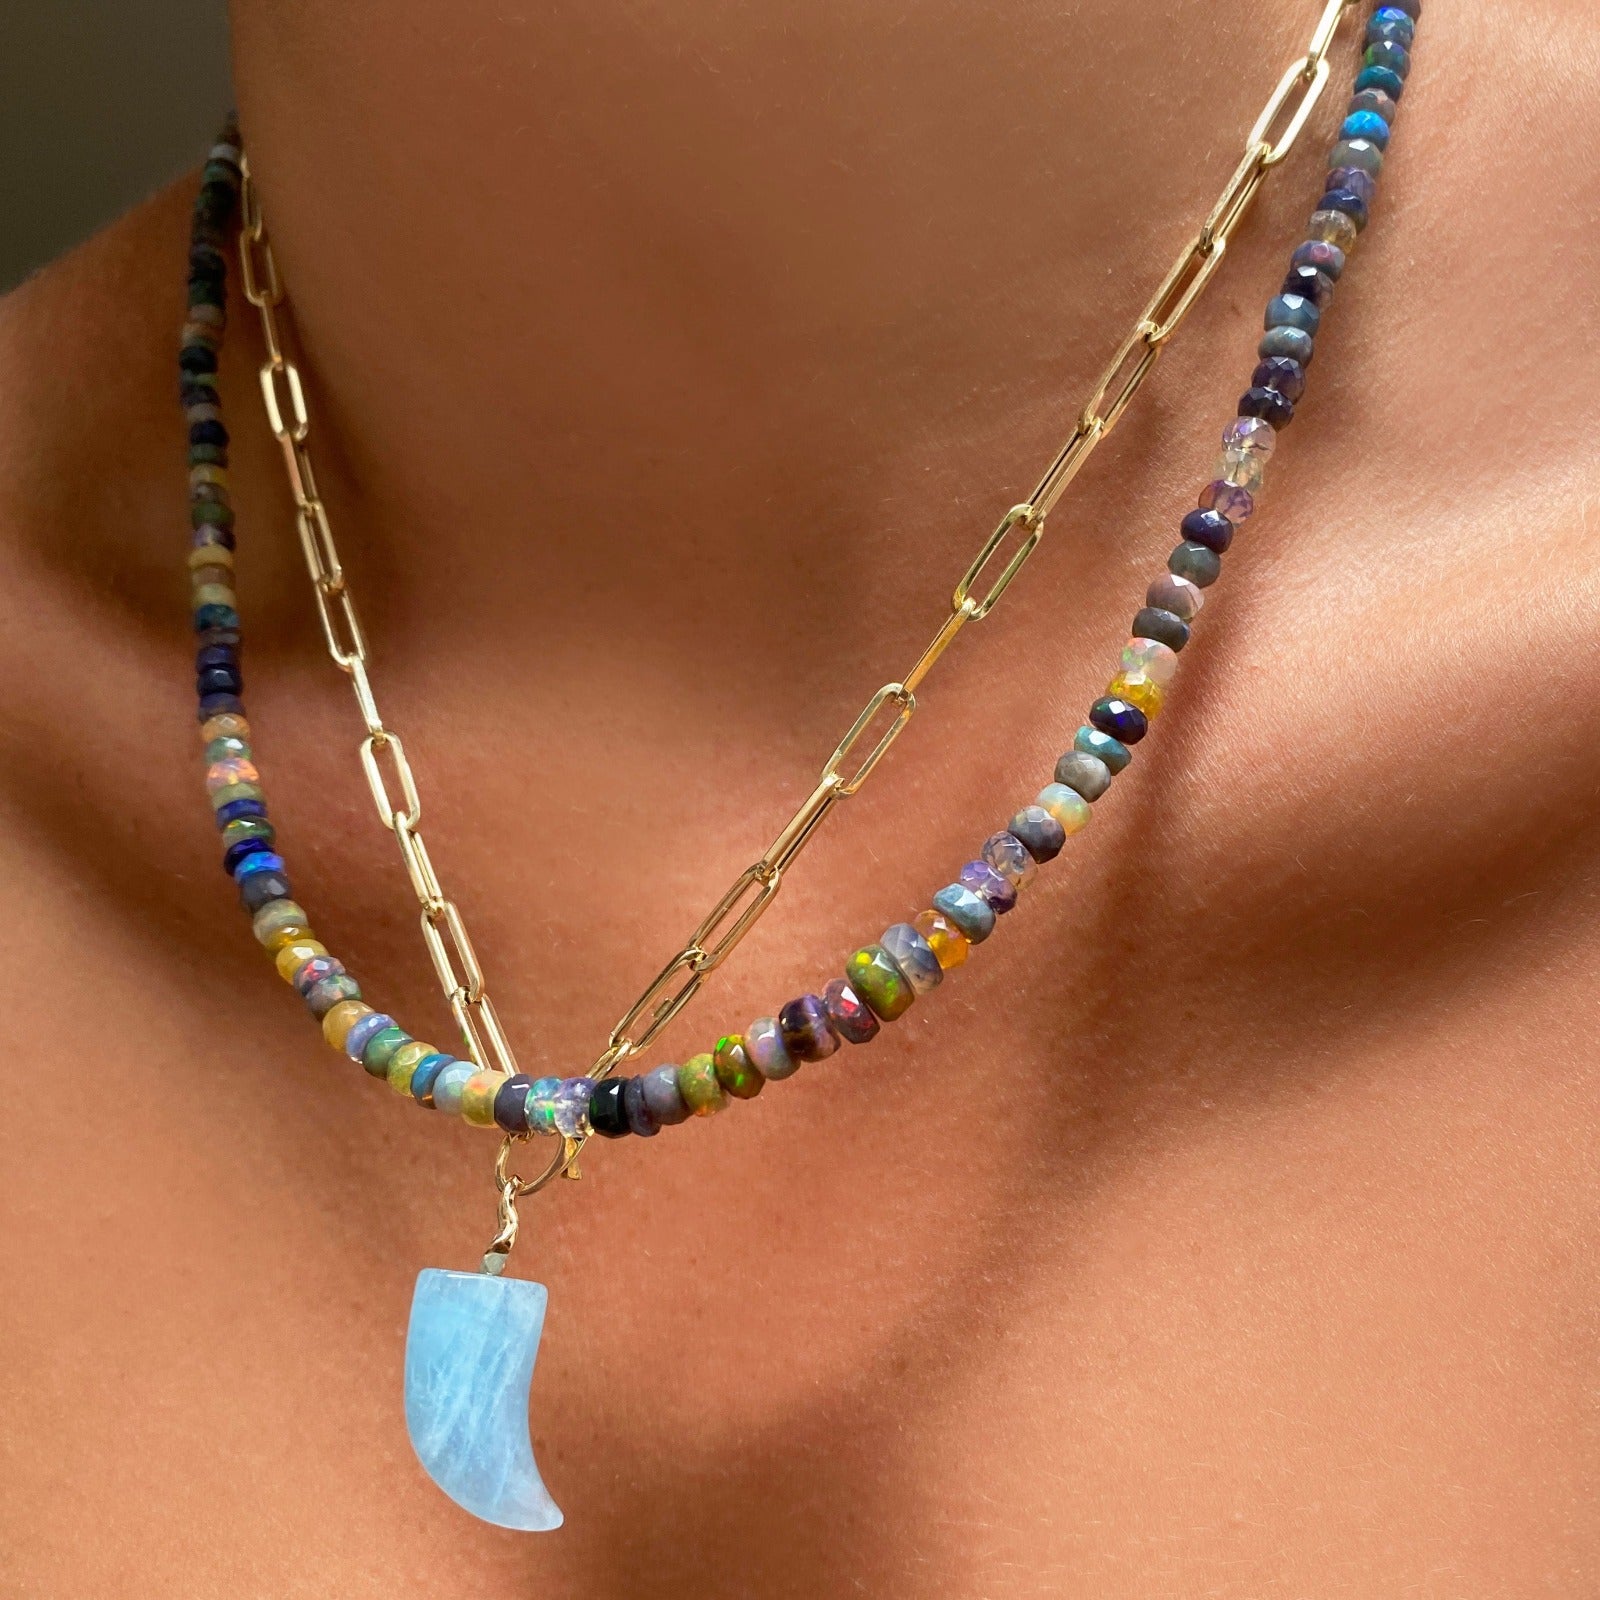 Shimmering beaded necklace made of faceted opals in shades of green, yellow, and blue on a gold linking ovals clasp. Styled on a neck layered with a chunky paperclip chain necklace and amazonite horn charm. 